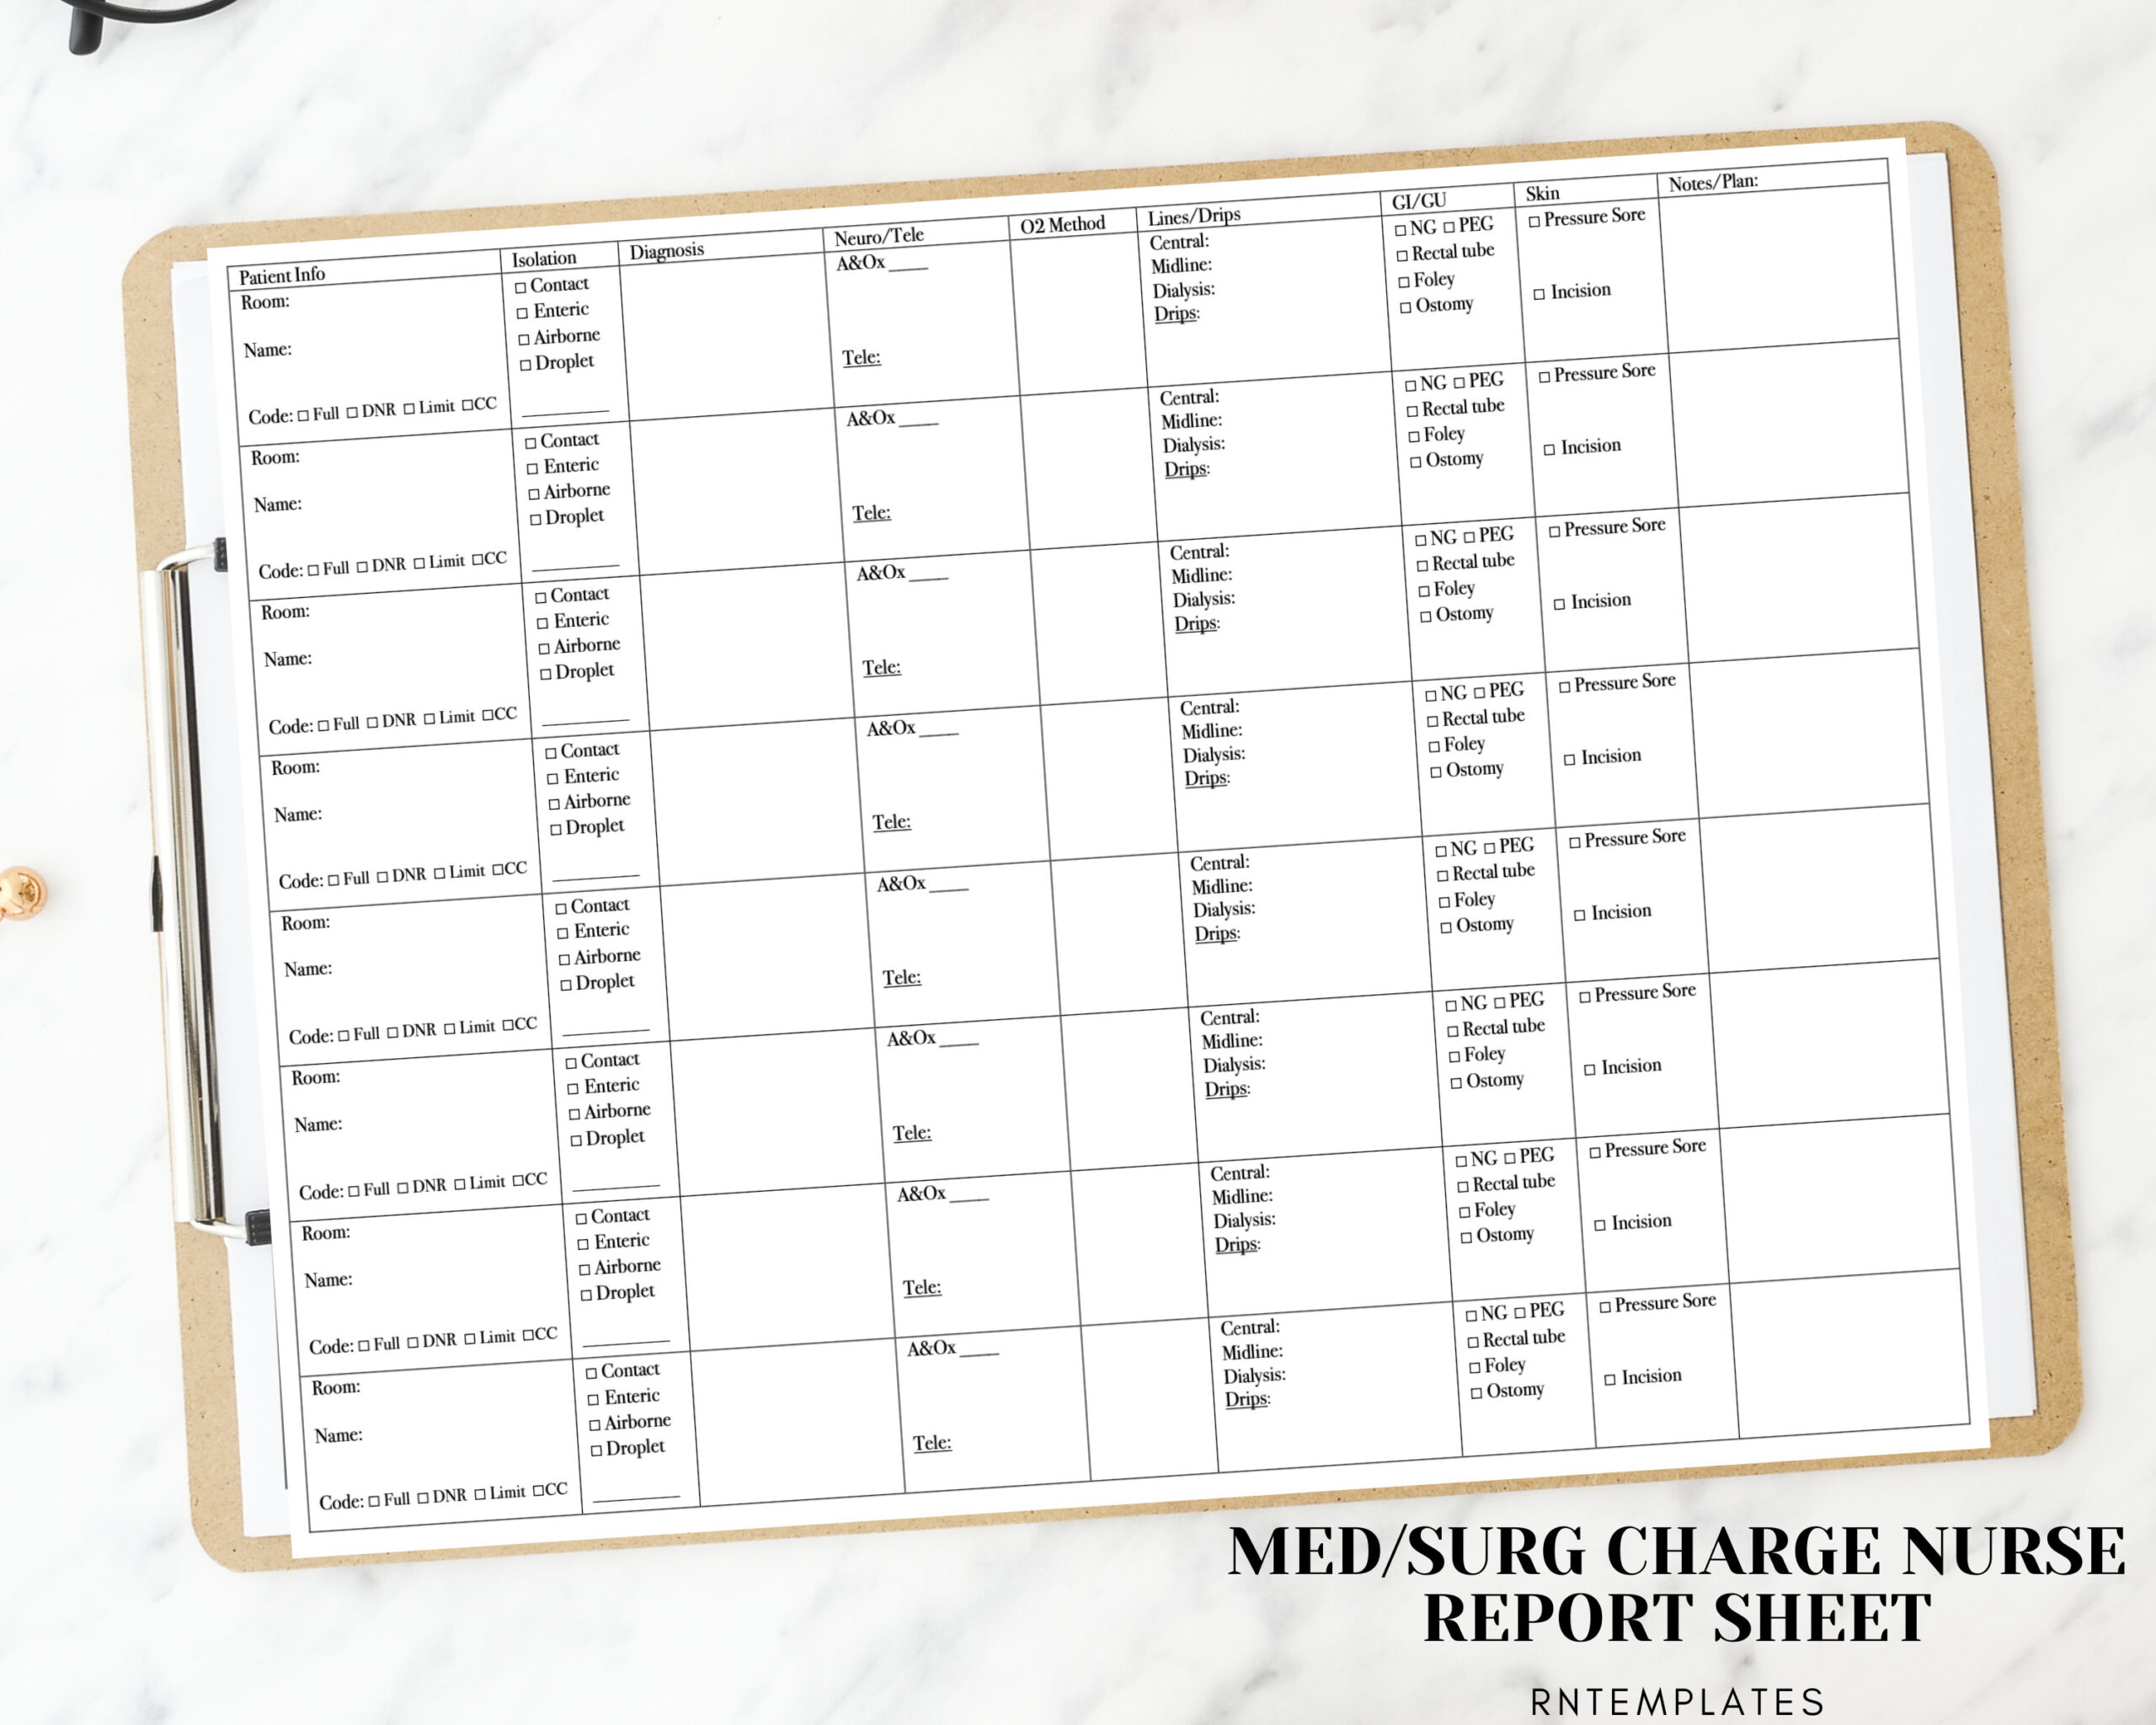 Charge Nurse Brain Report Sheet Med/surg Version Nurse – Etsy Regarding Charge Nurse Report Sheet Template